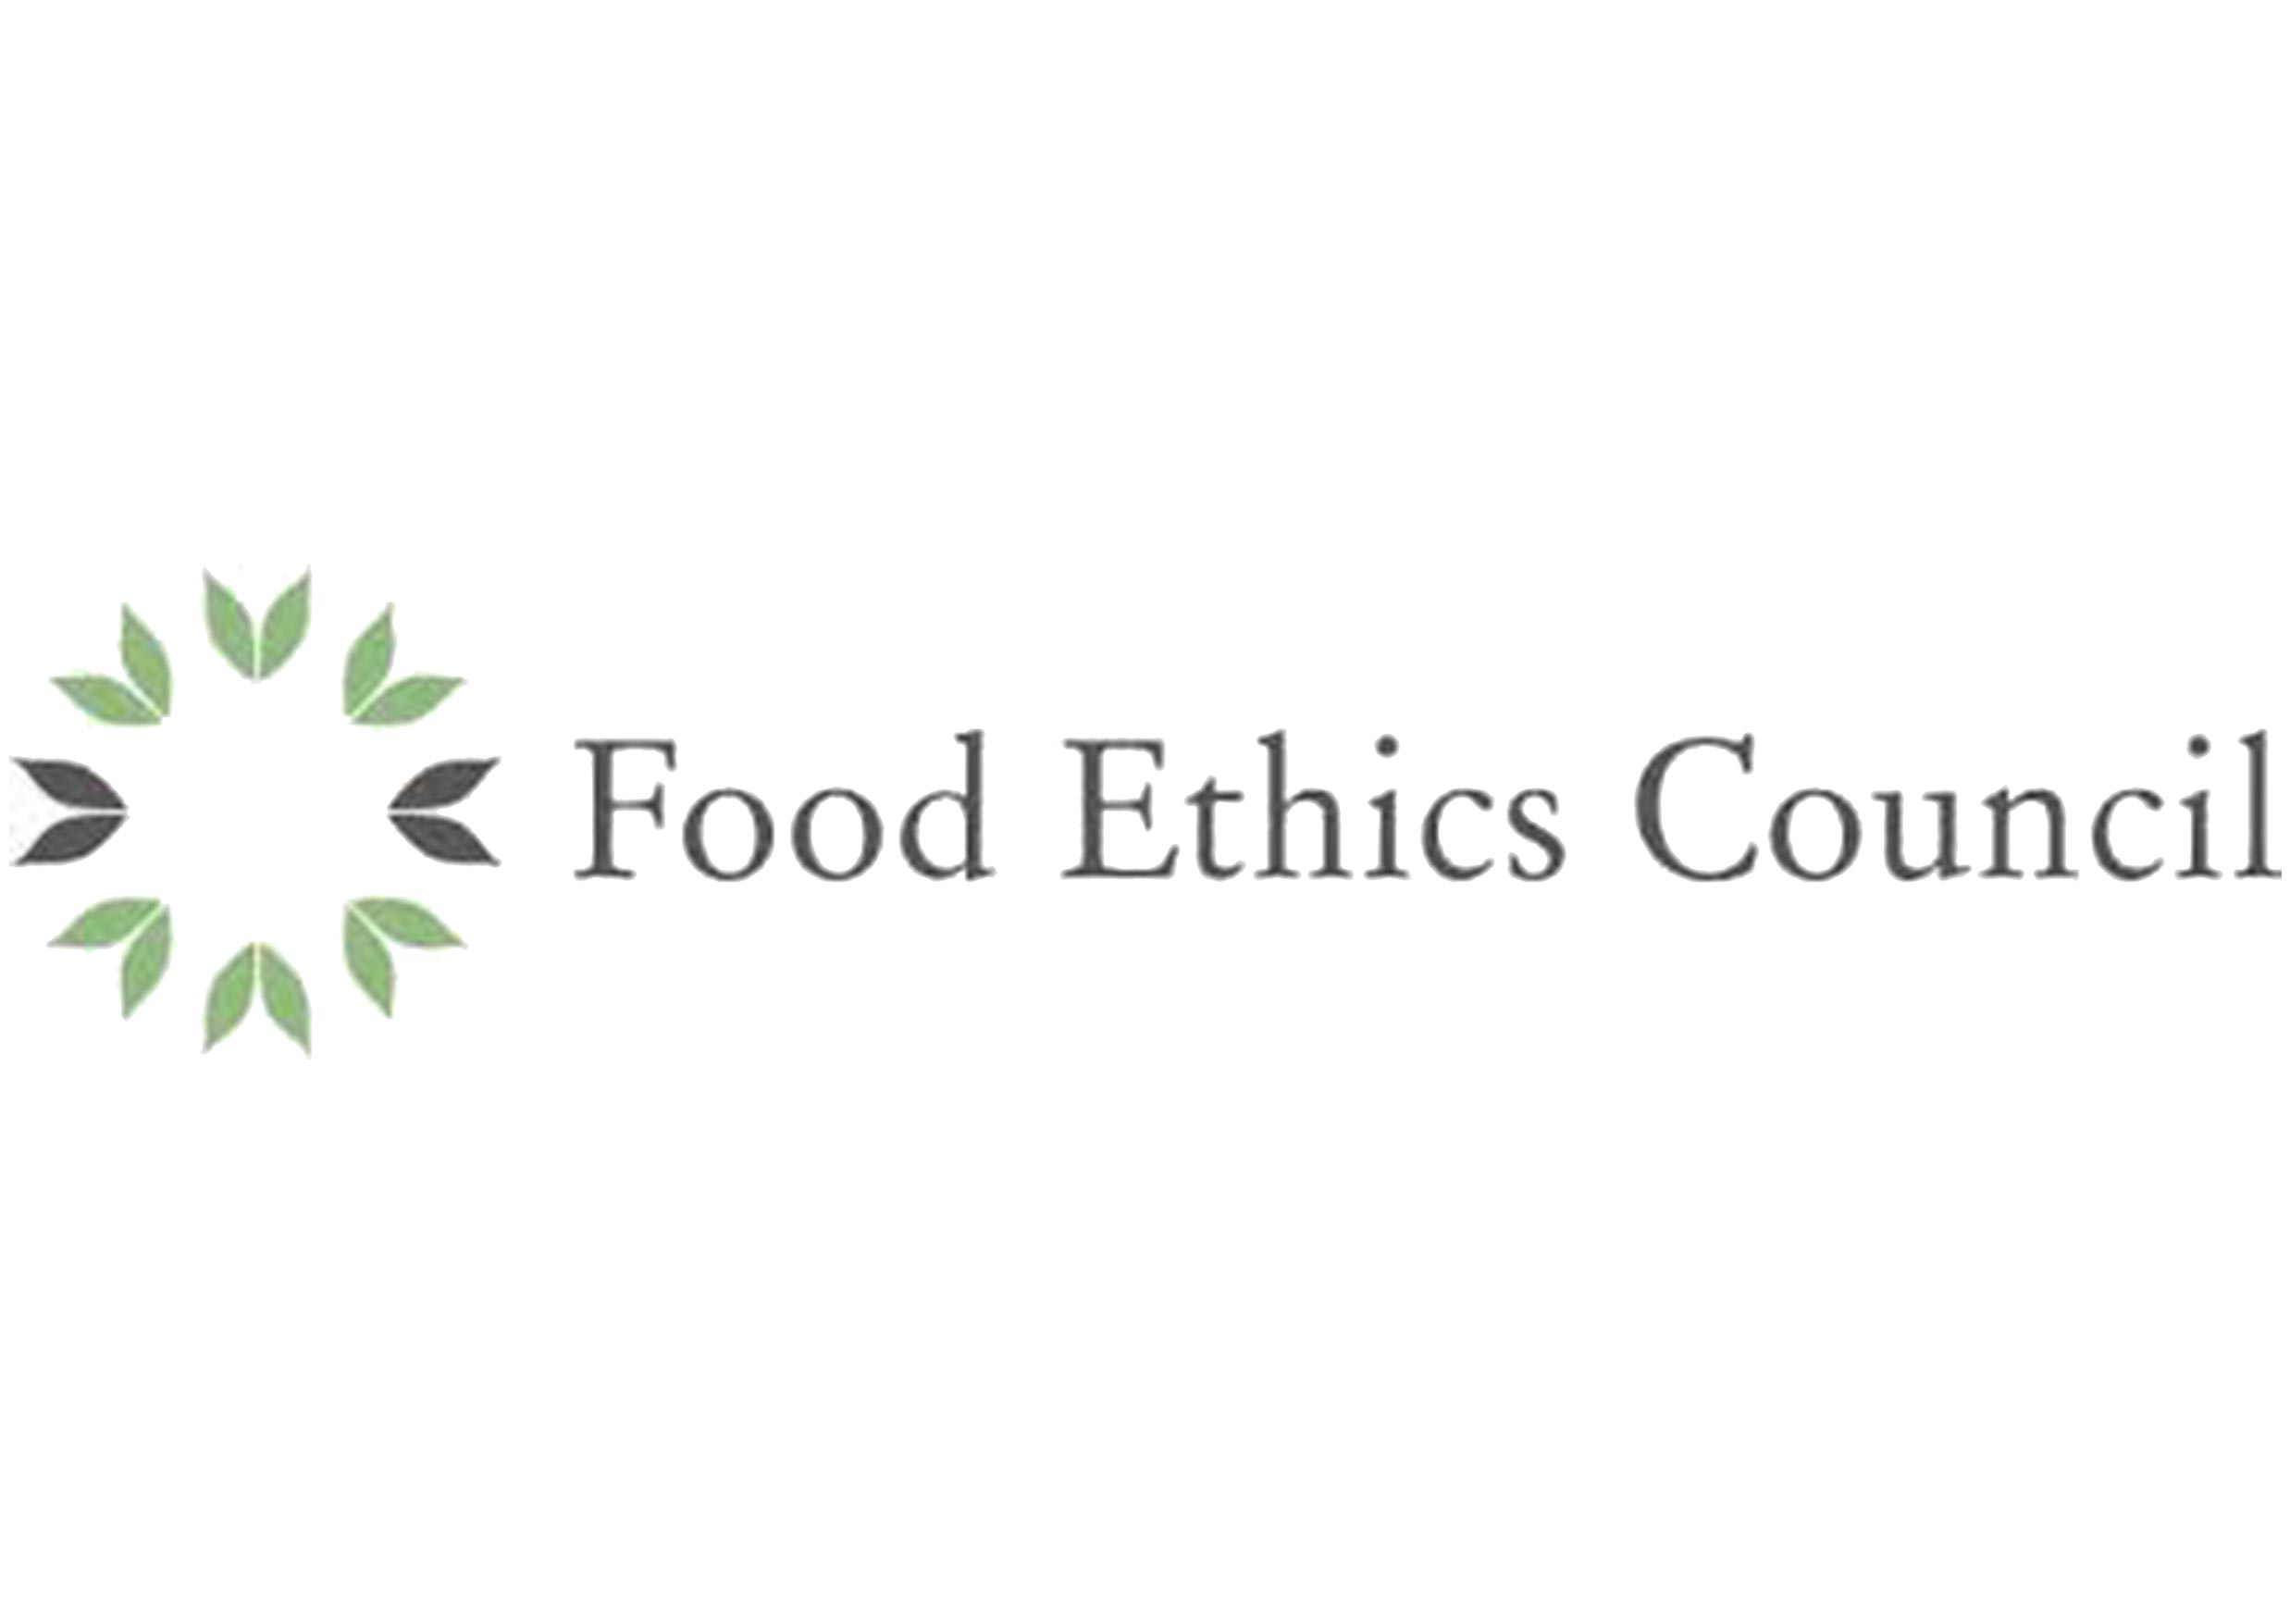 15. Food Ethics Council